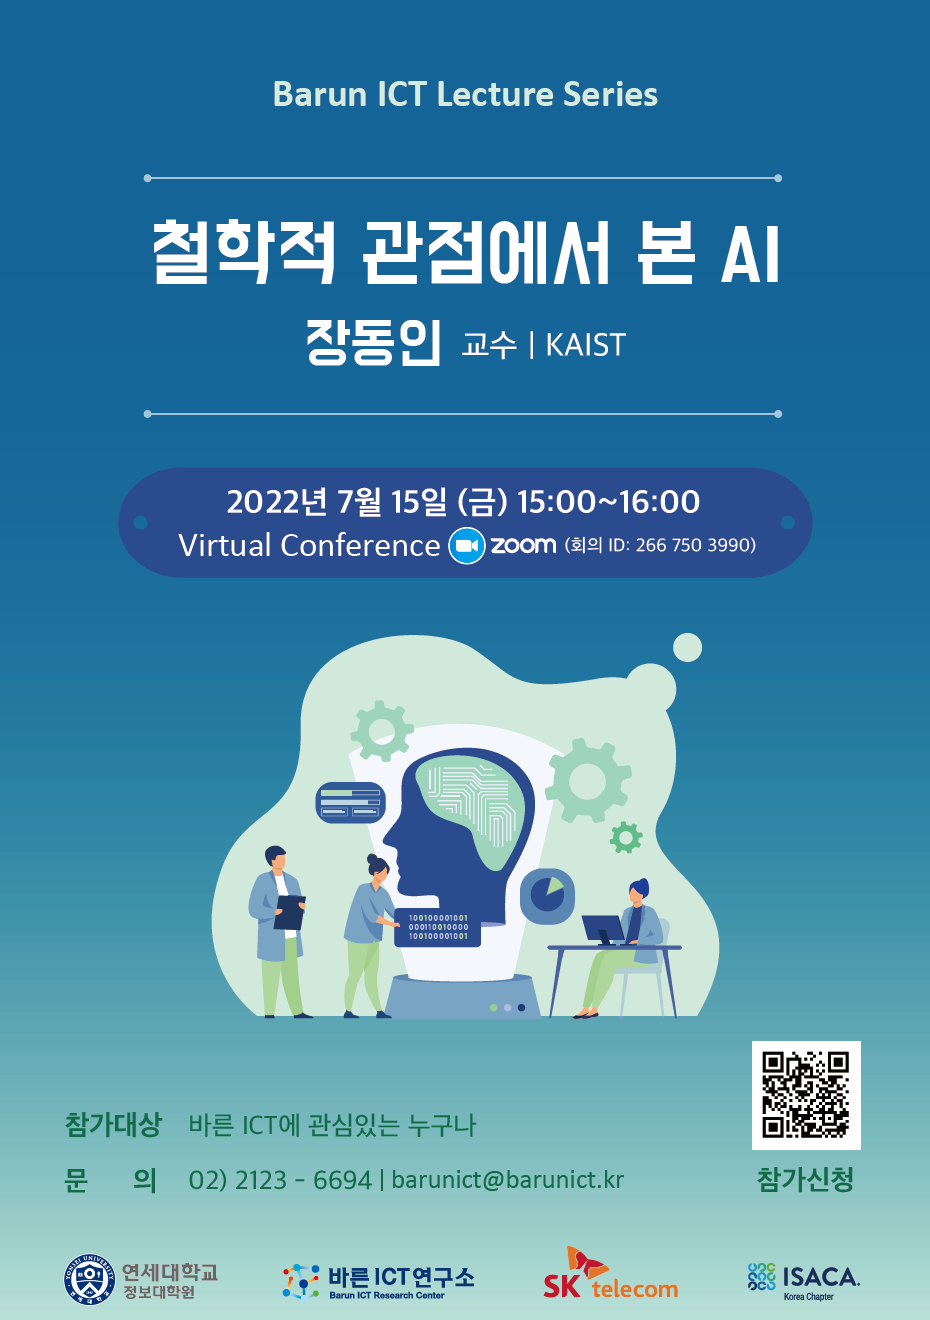 Barun ICT Research Lecture Series 7월 15일 (금) 15:00~